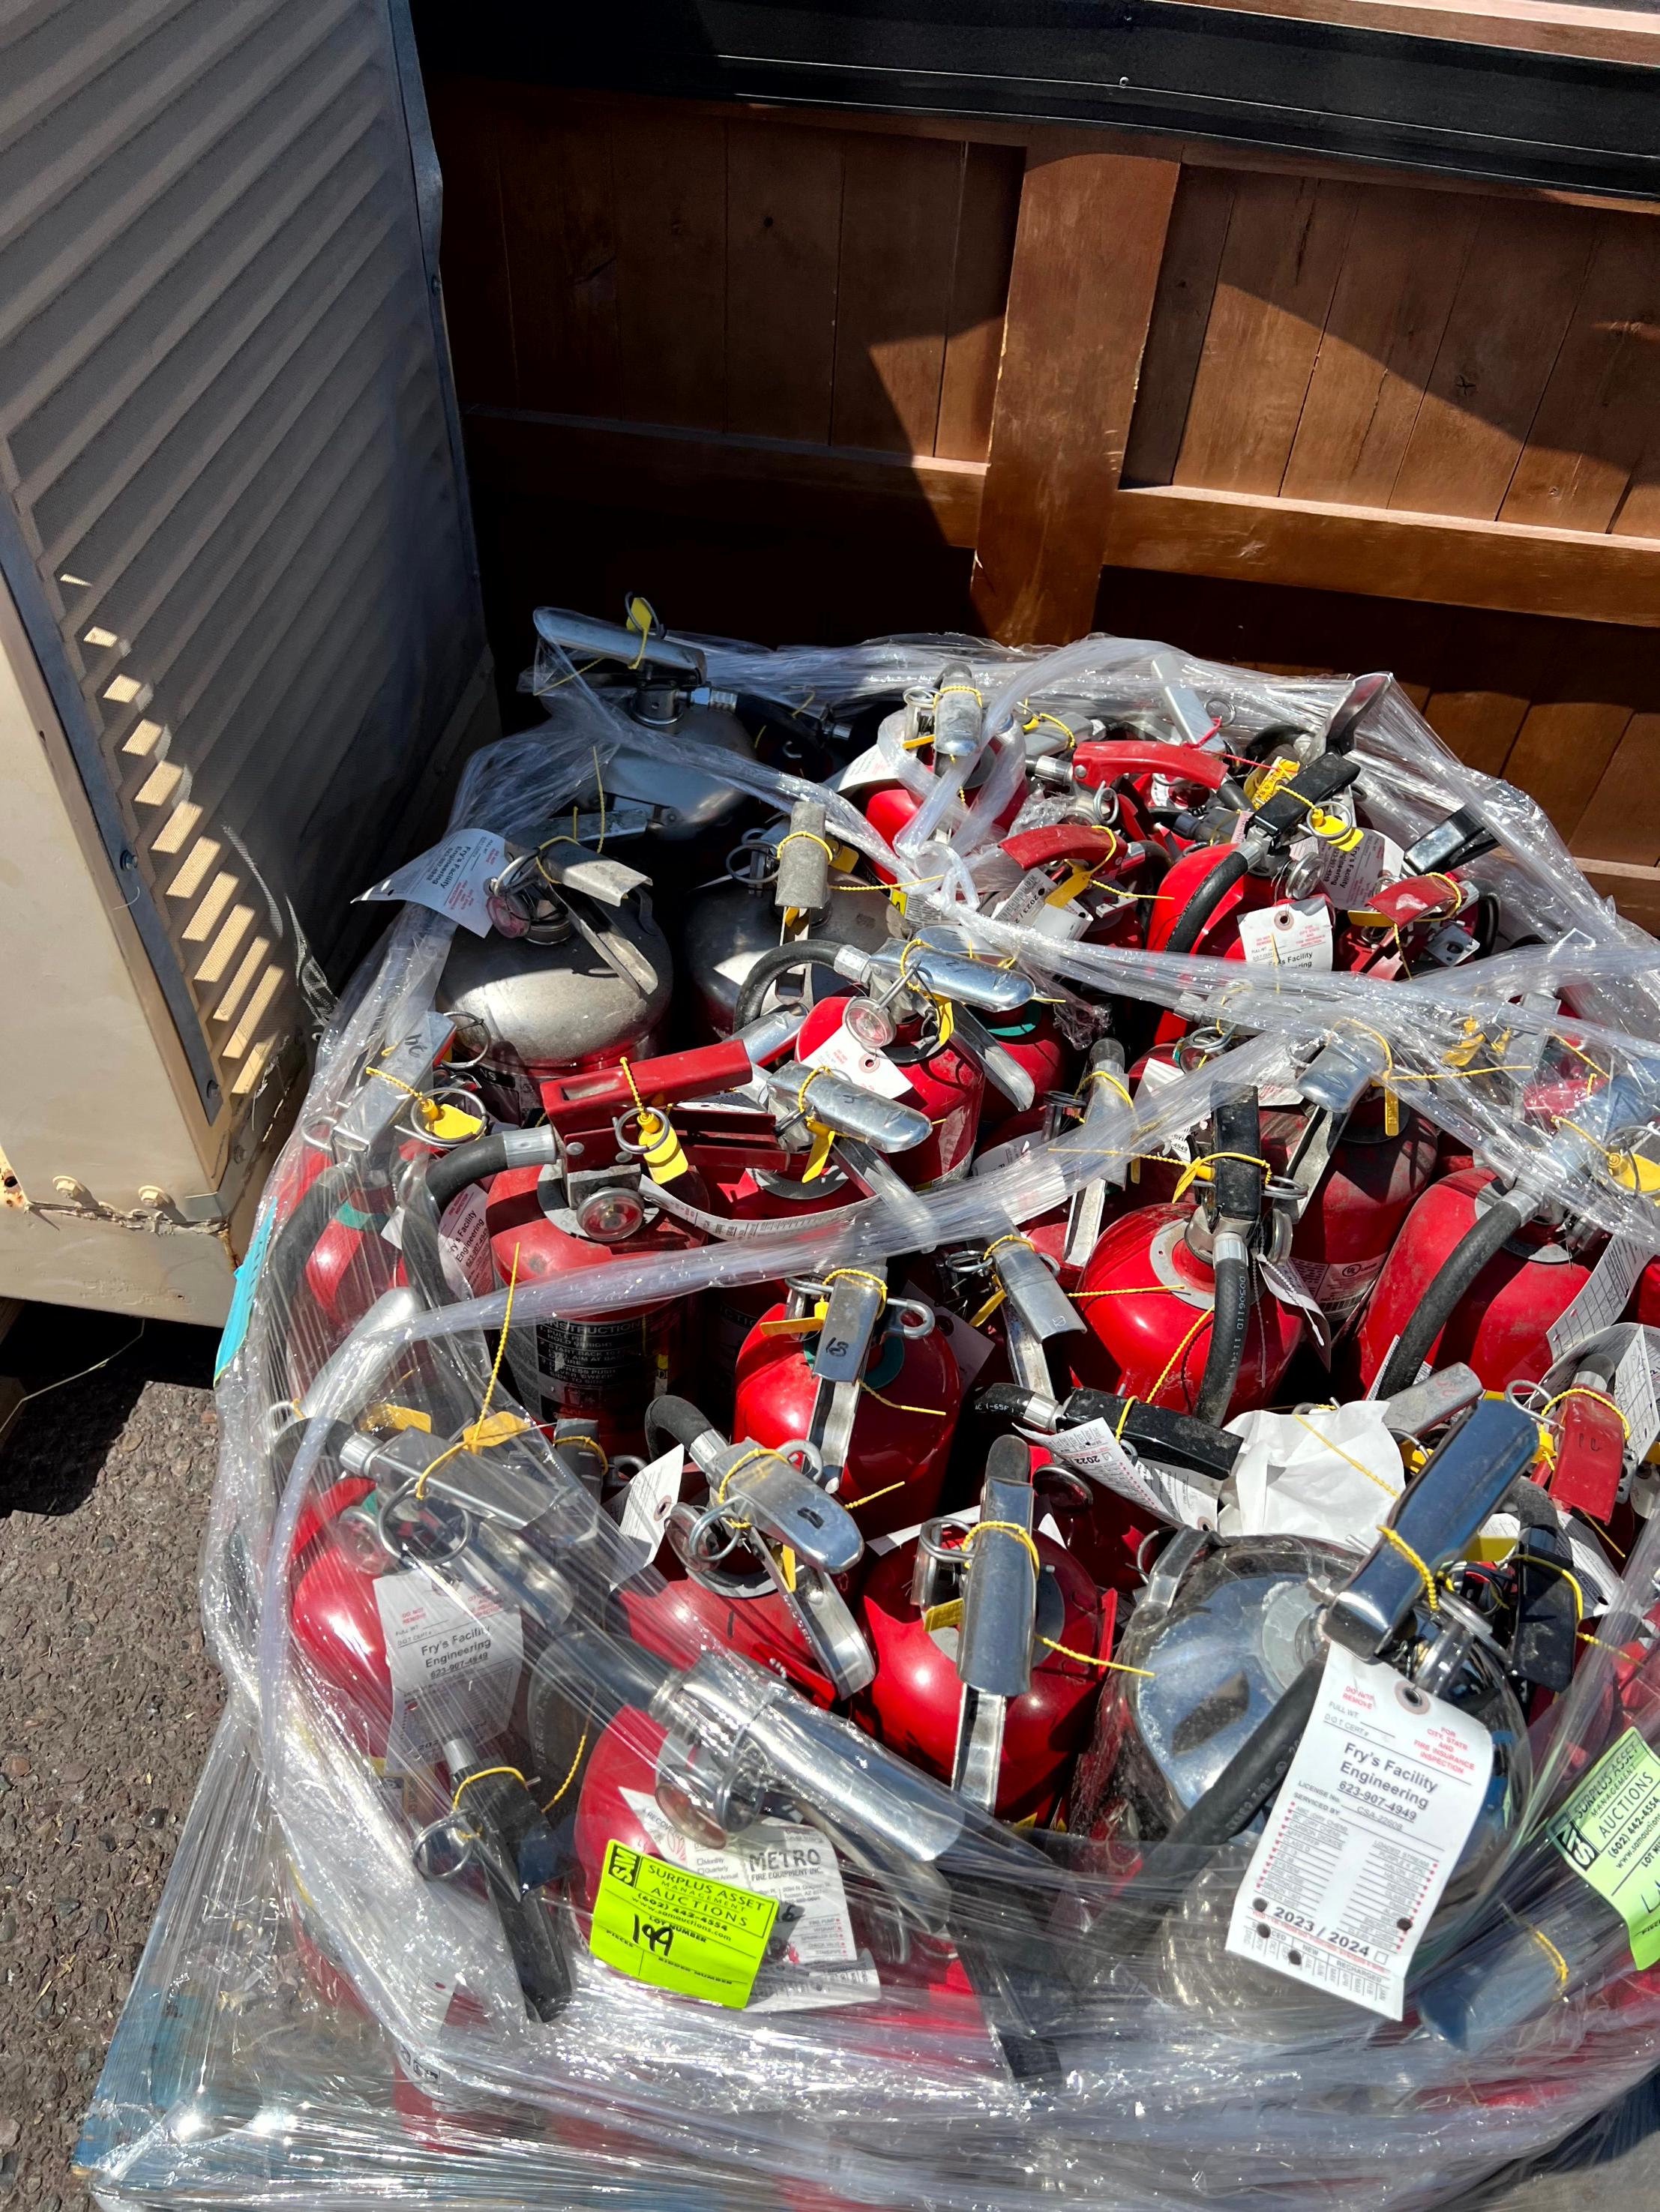 Pallet of Fire Extinguishers